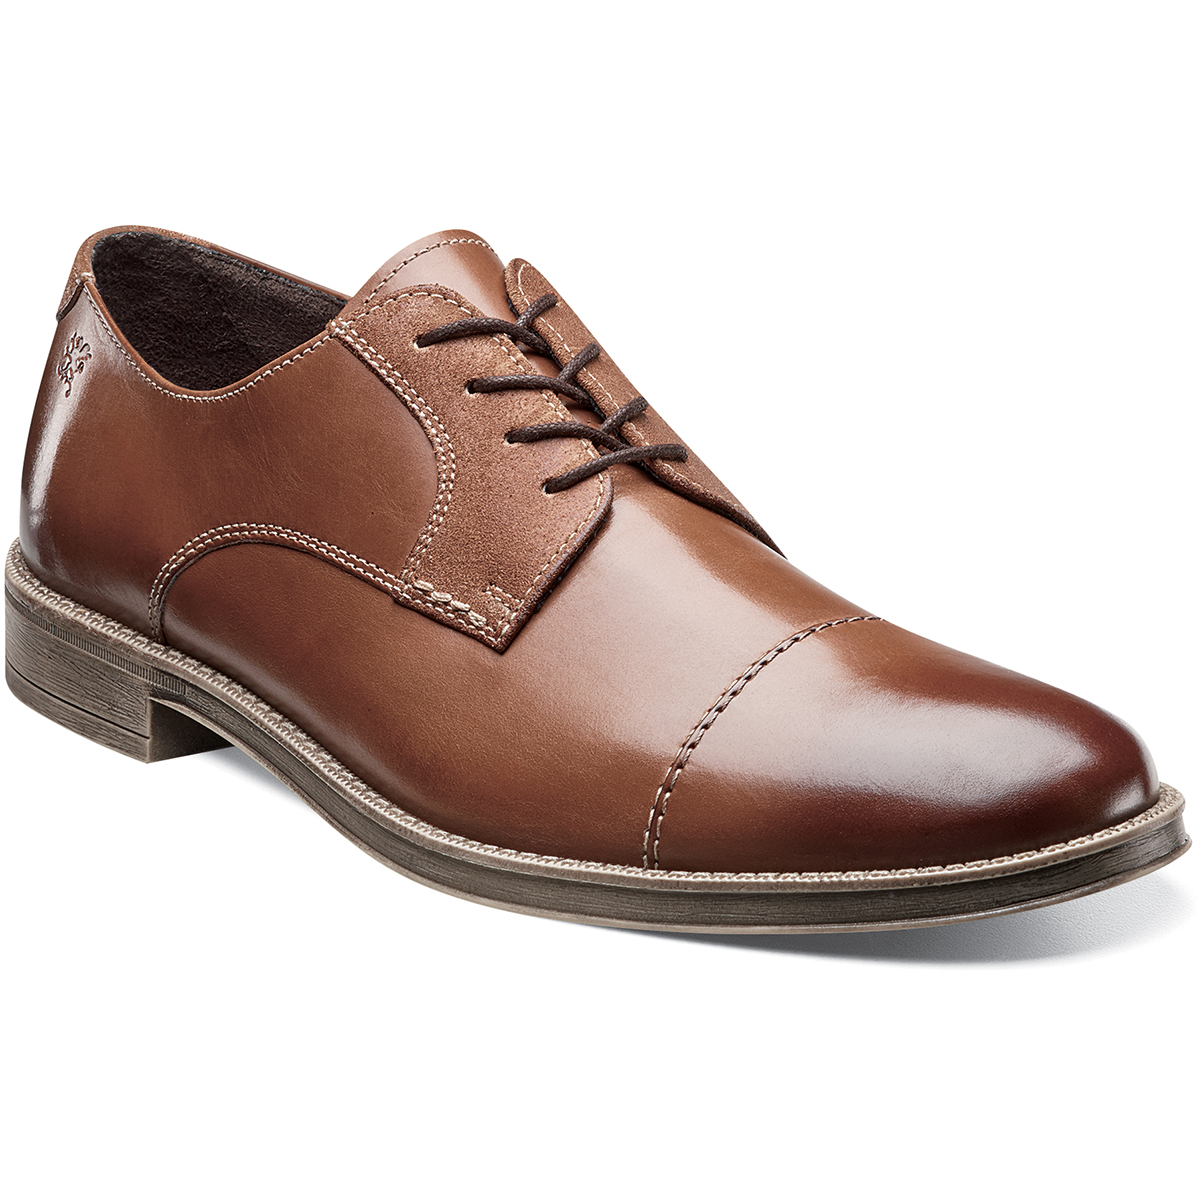 Clearance Shoes | Cognac Cap Toe Oxford | Stacy Adams Caldwell